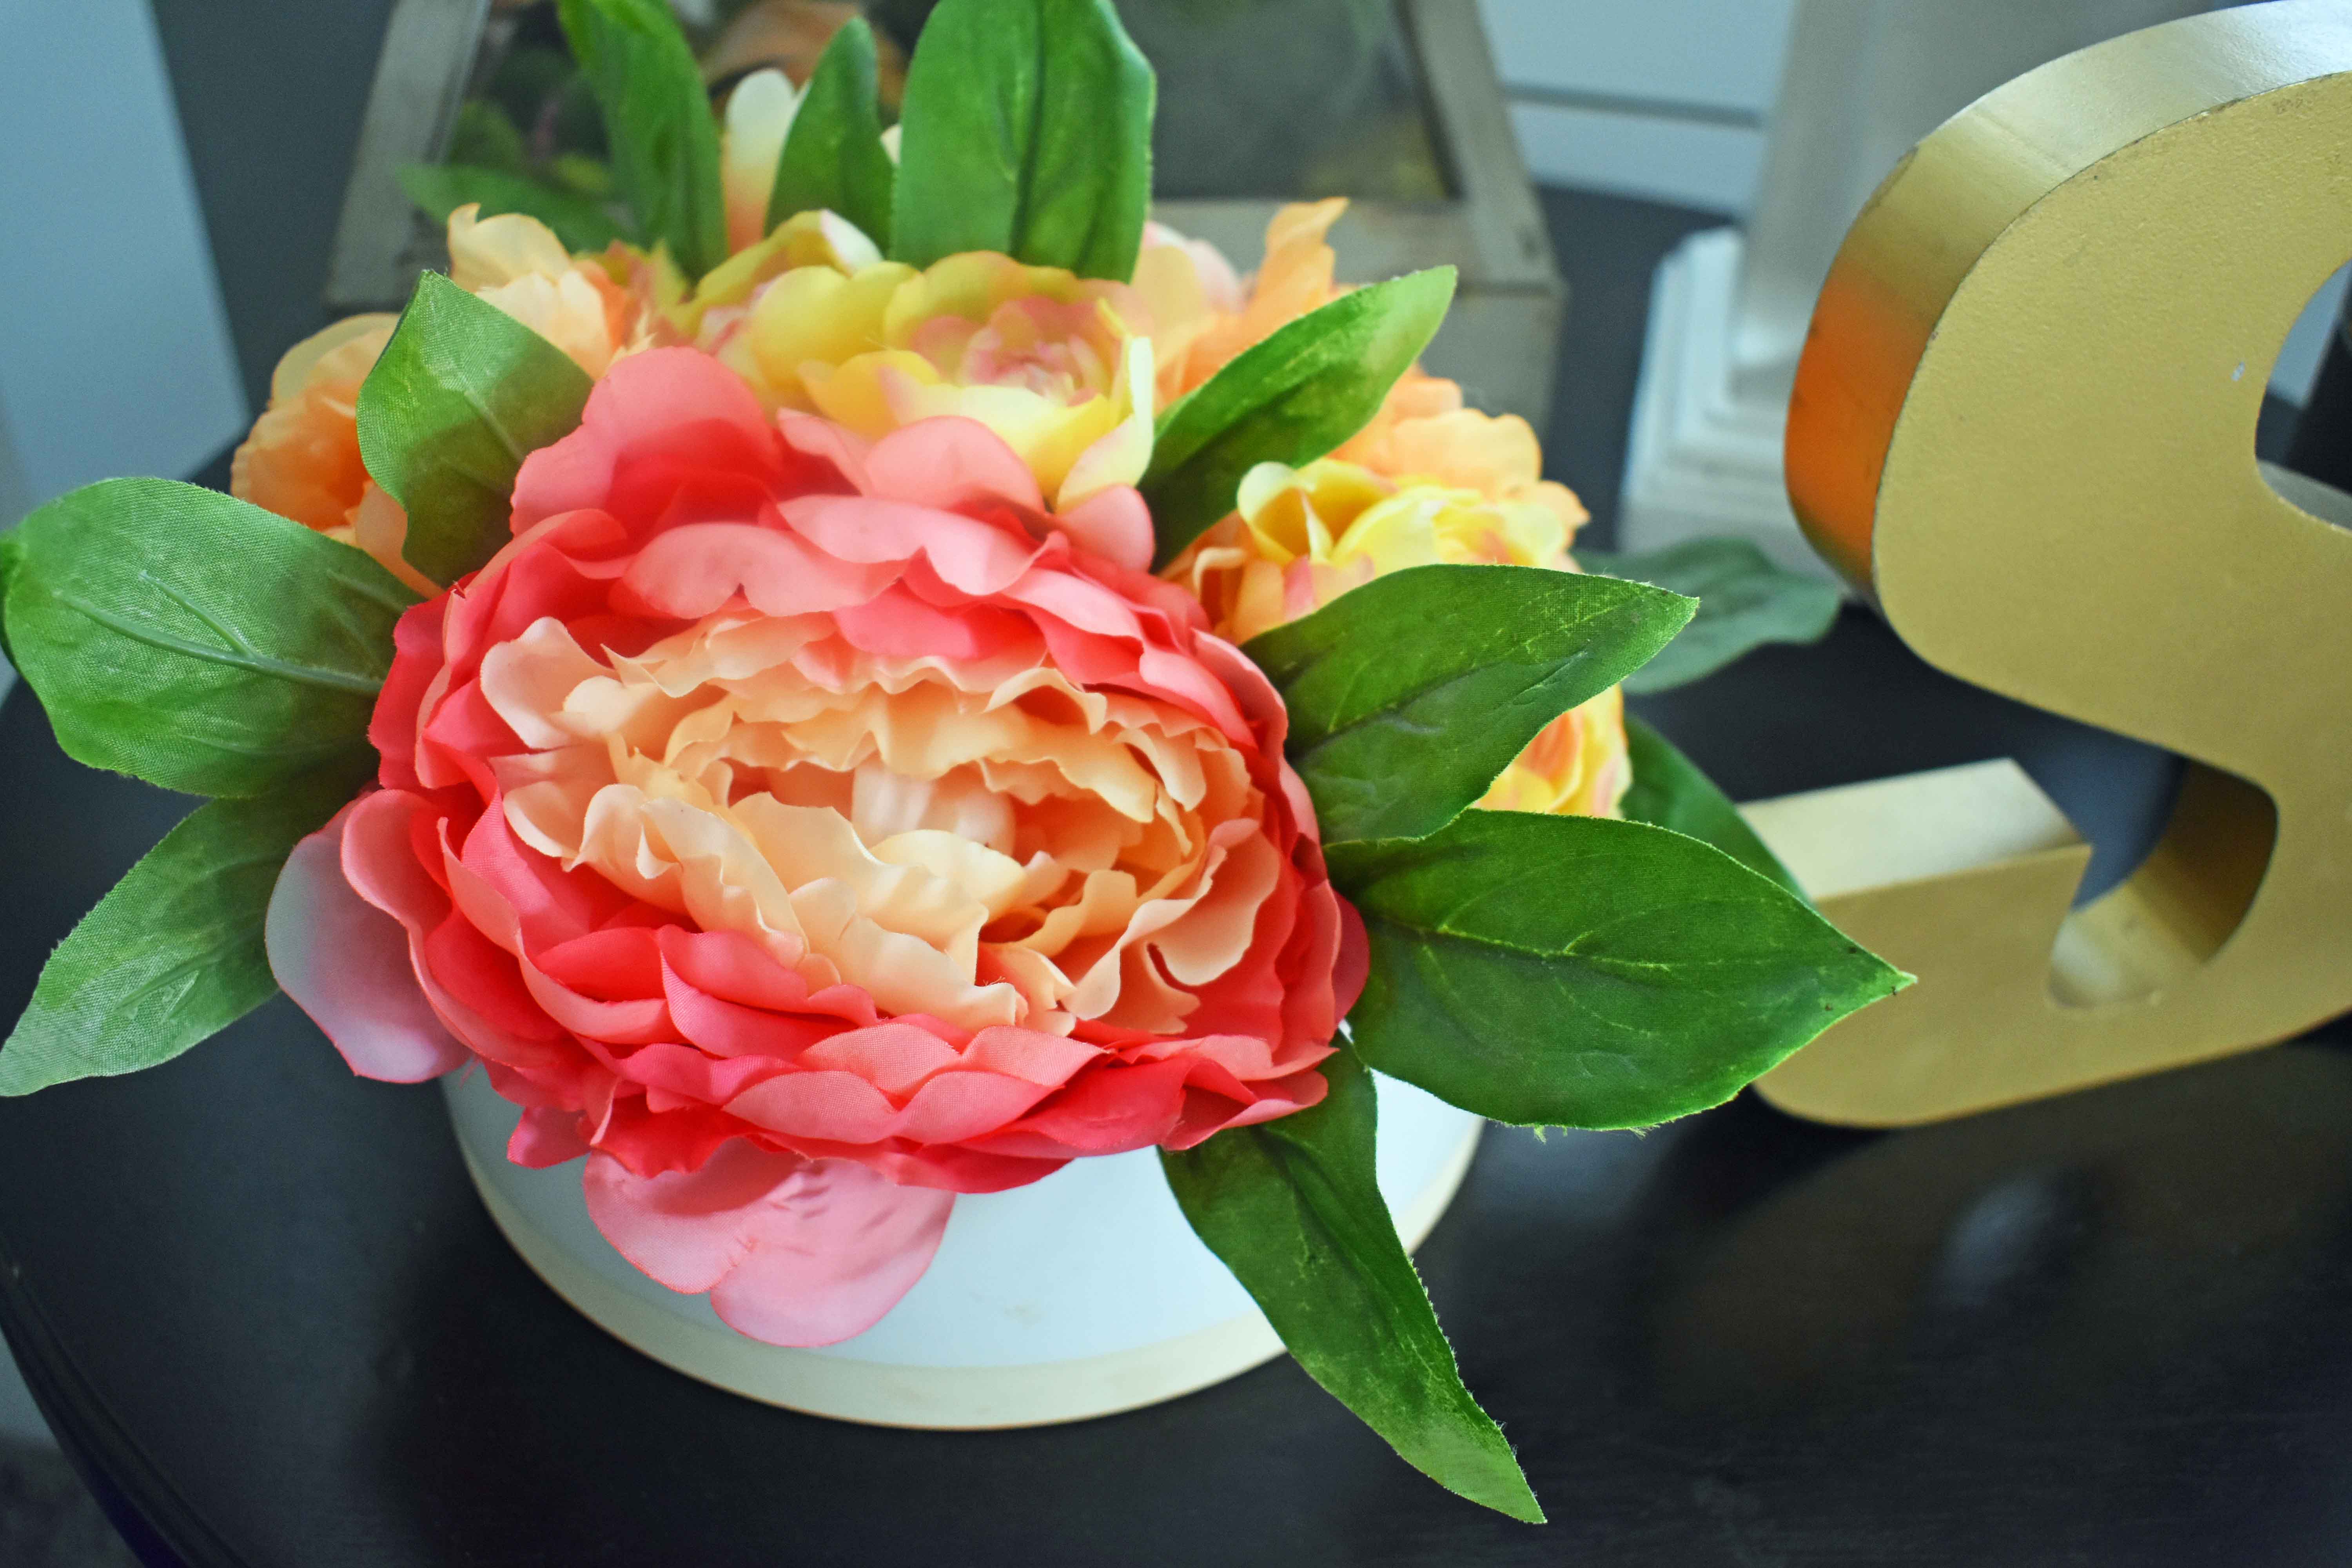 Spring Decoration Ideas. Bright and beautiful peach peonies to beautify your home. www.modernhoney.com